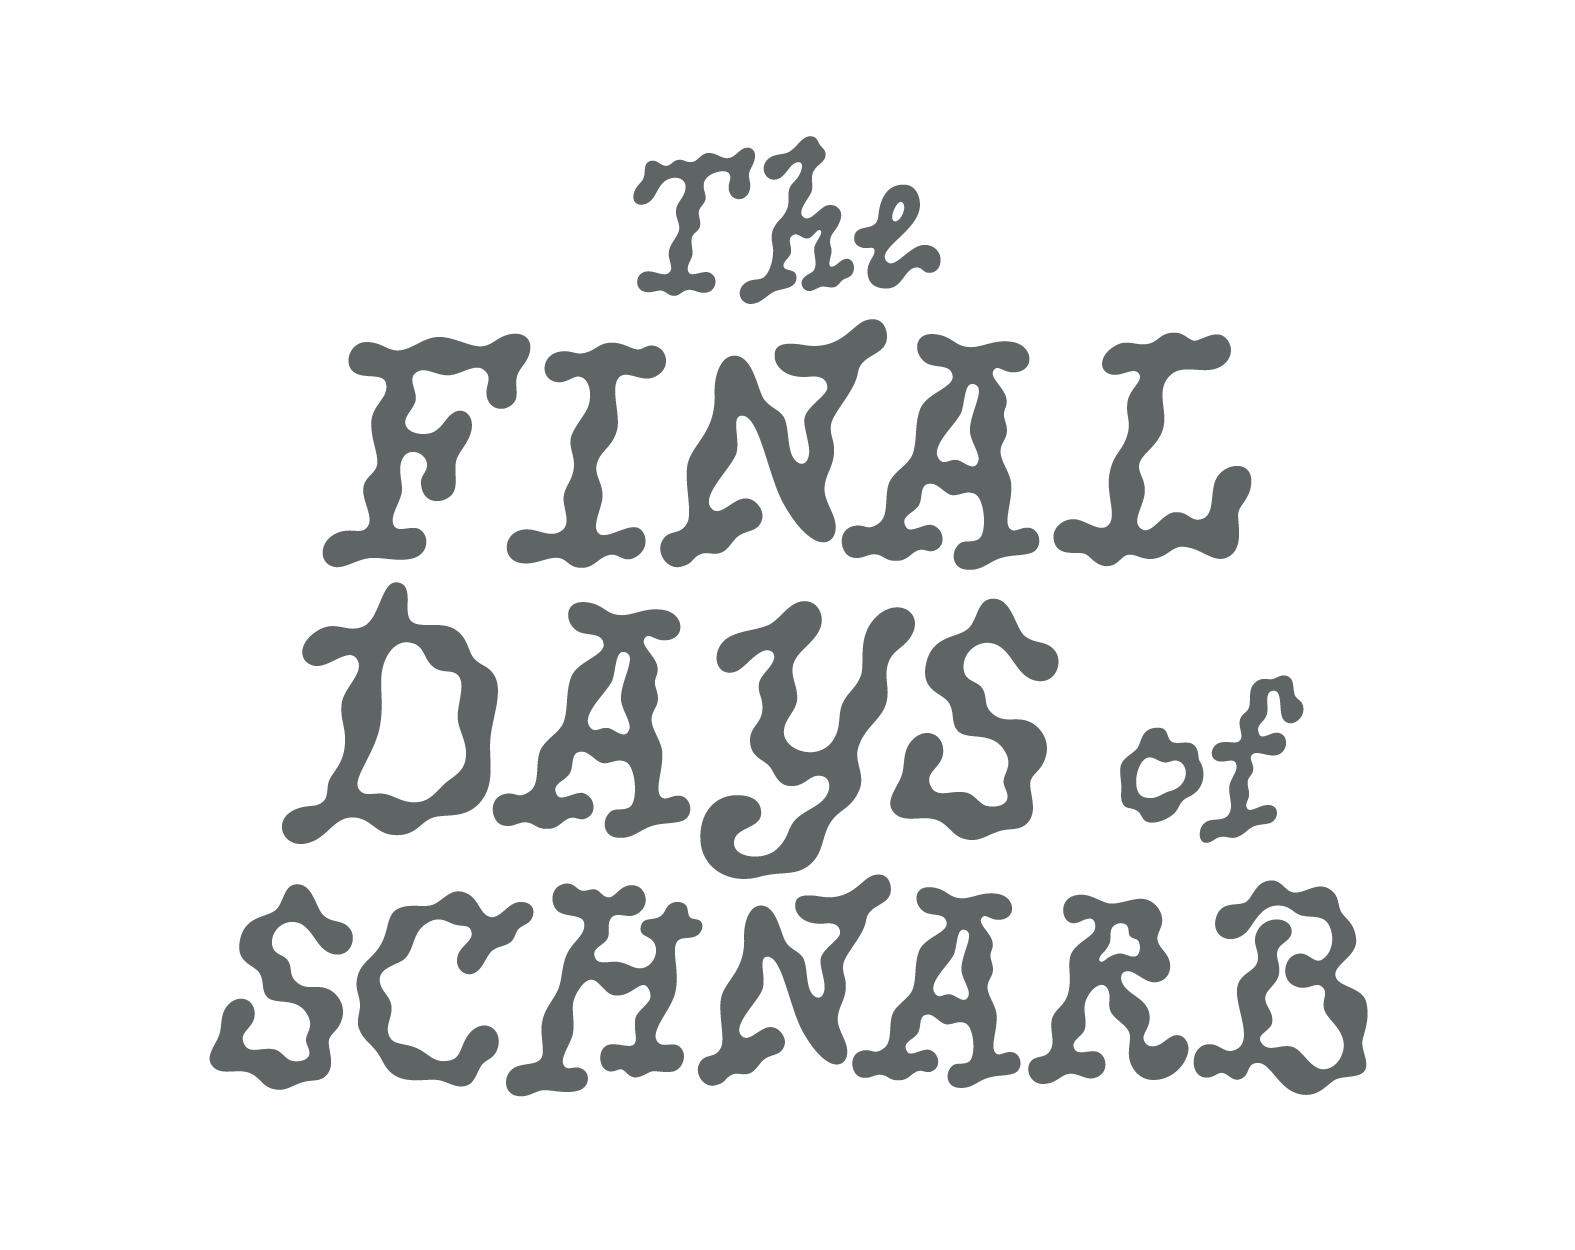 The Final Days of Schnarb